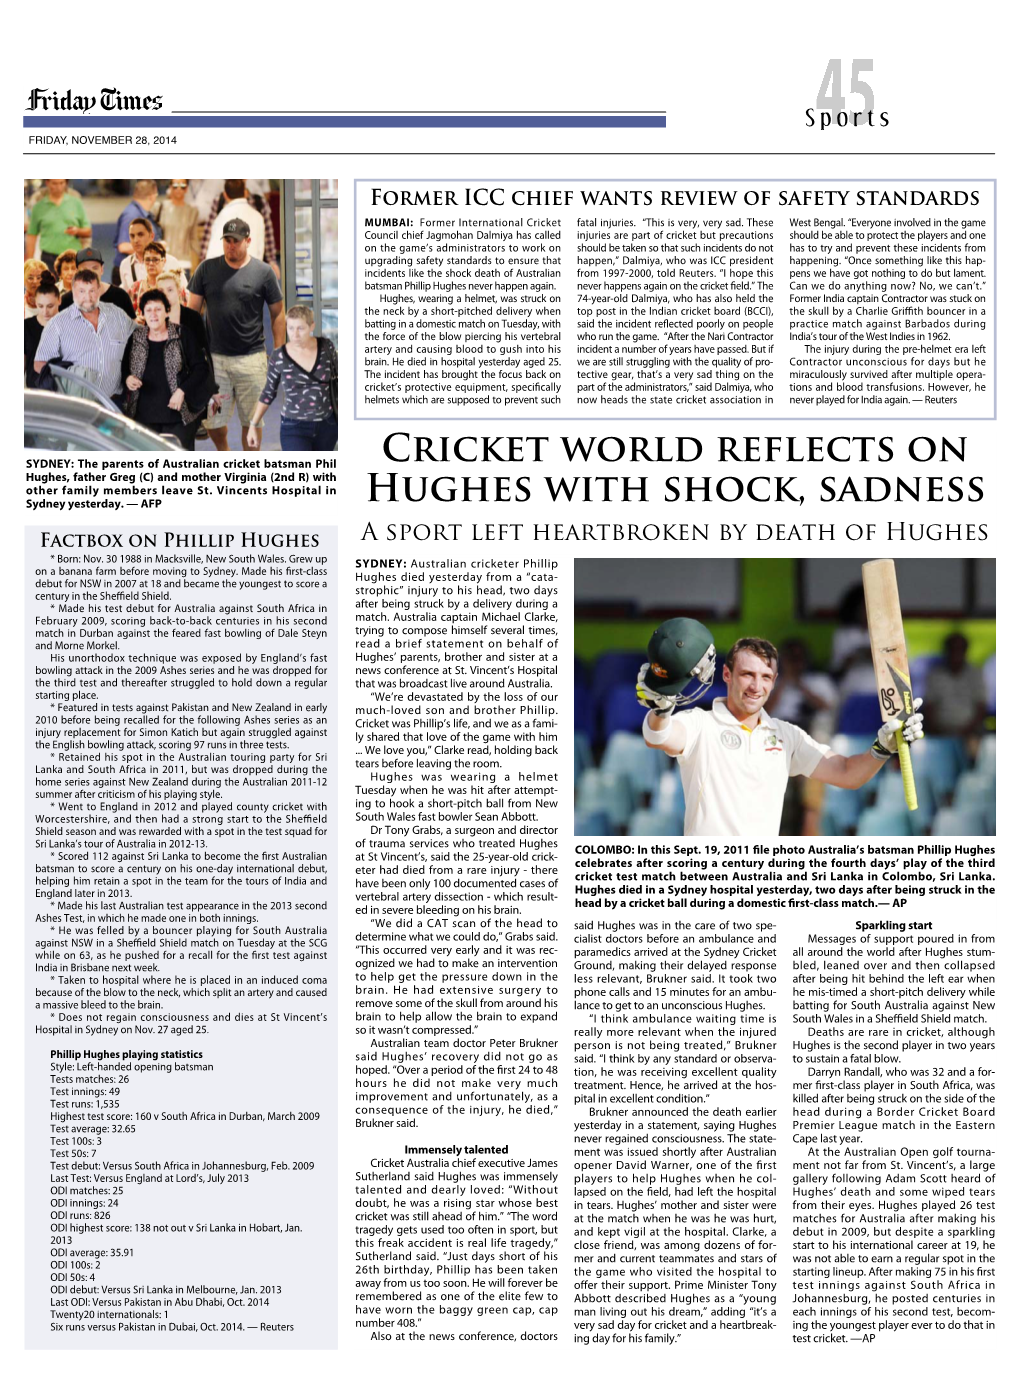 Cricket World Reflects on Hughes with Shock, Sadness